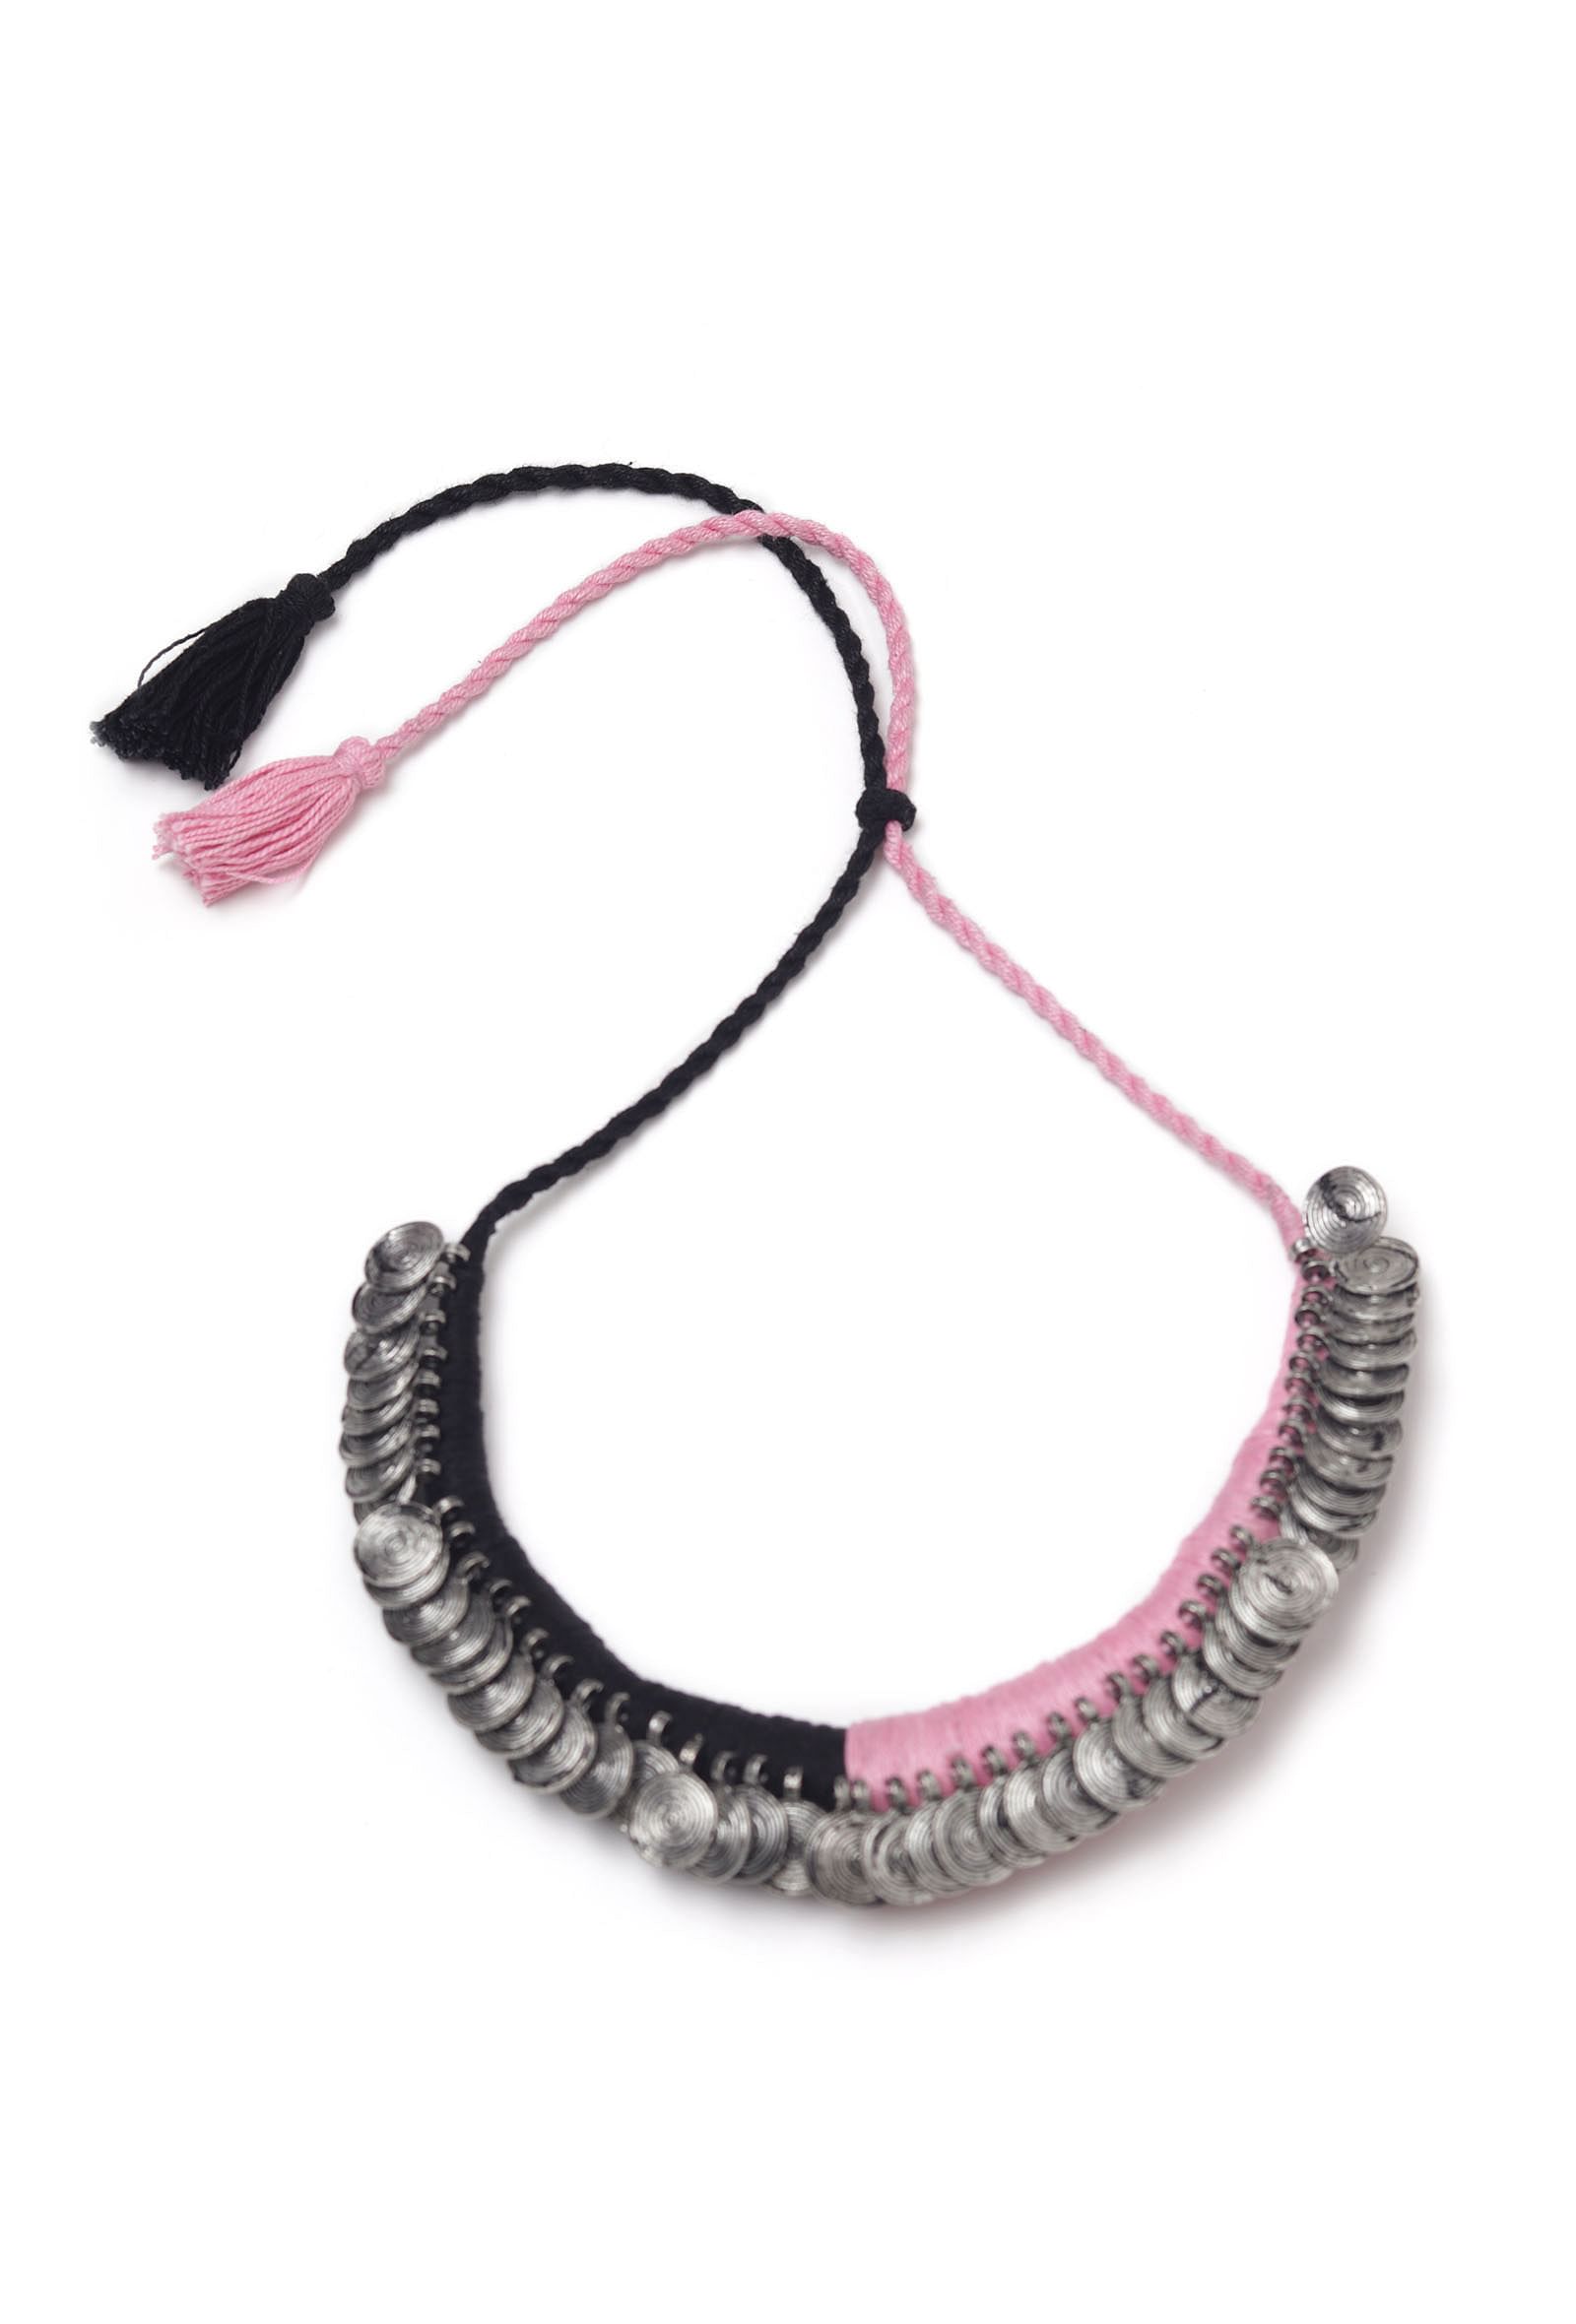 Mahira Duo Black and Pink Tribal Coin Necklace